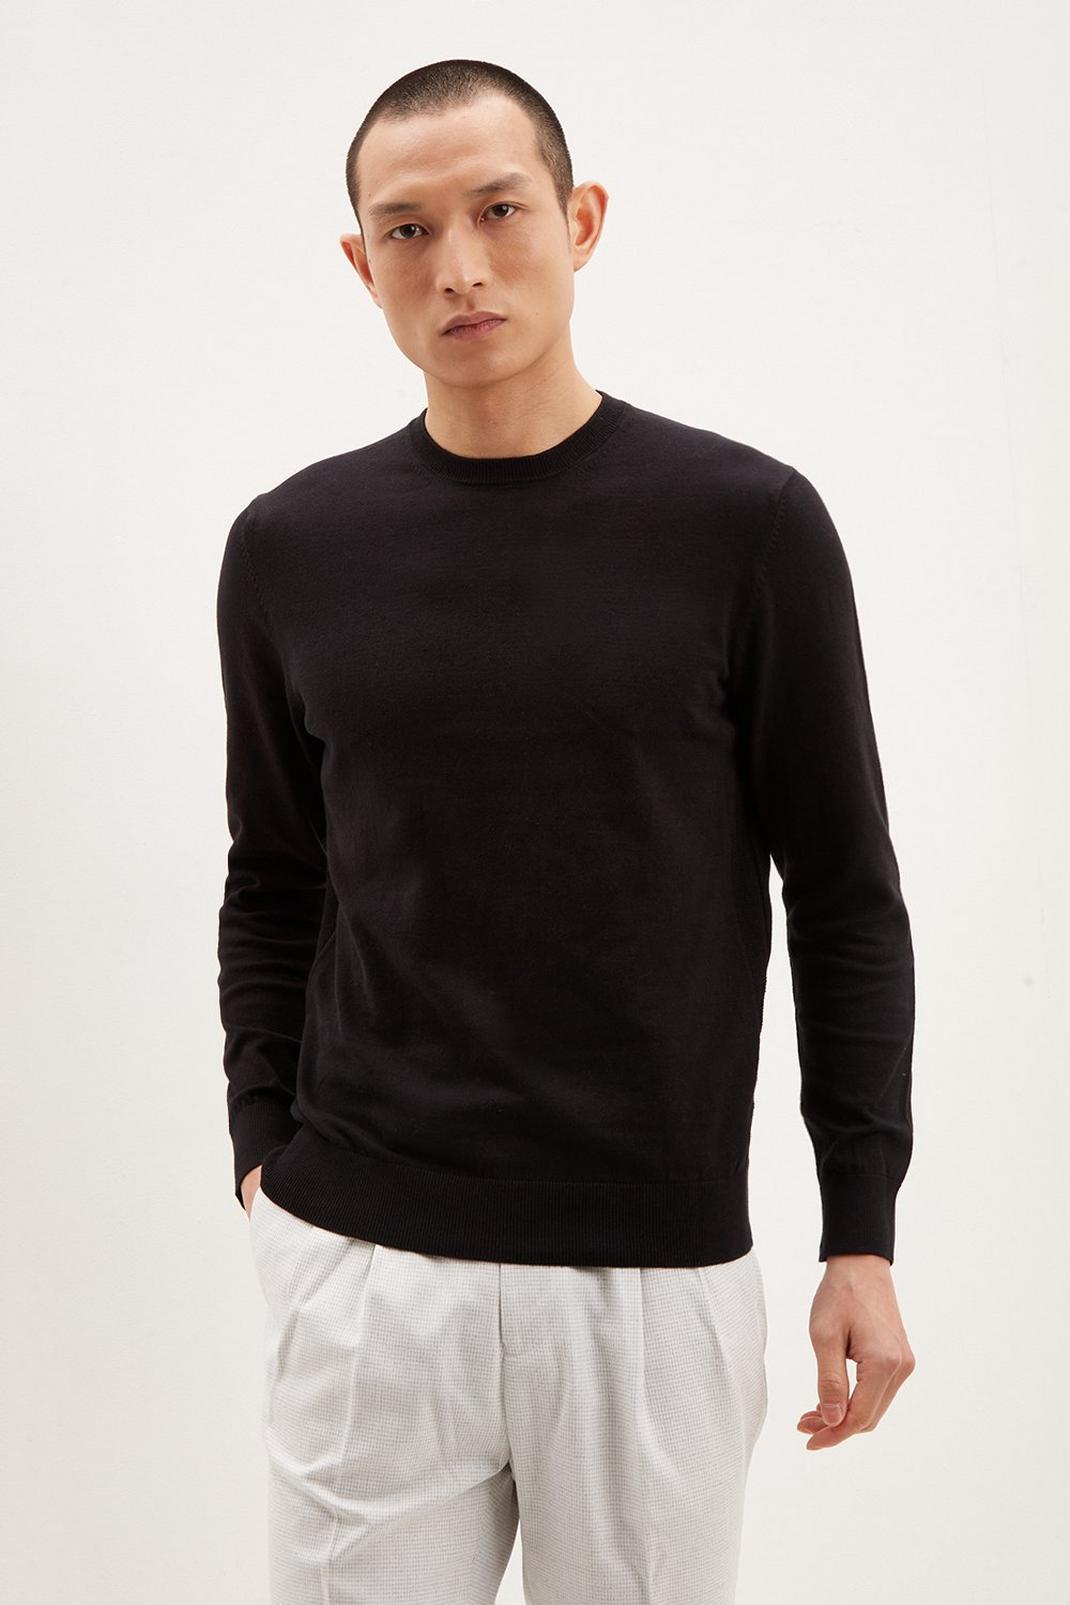 105 Black Crew Neck Jumper with Organic Cotton image number 1